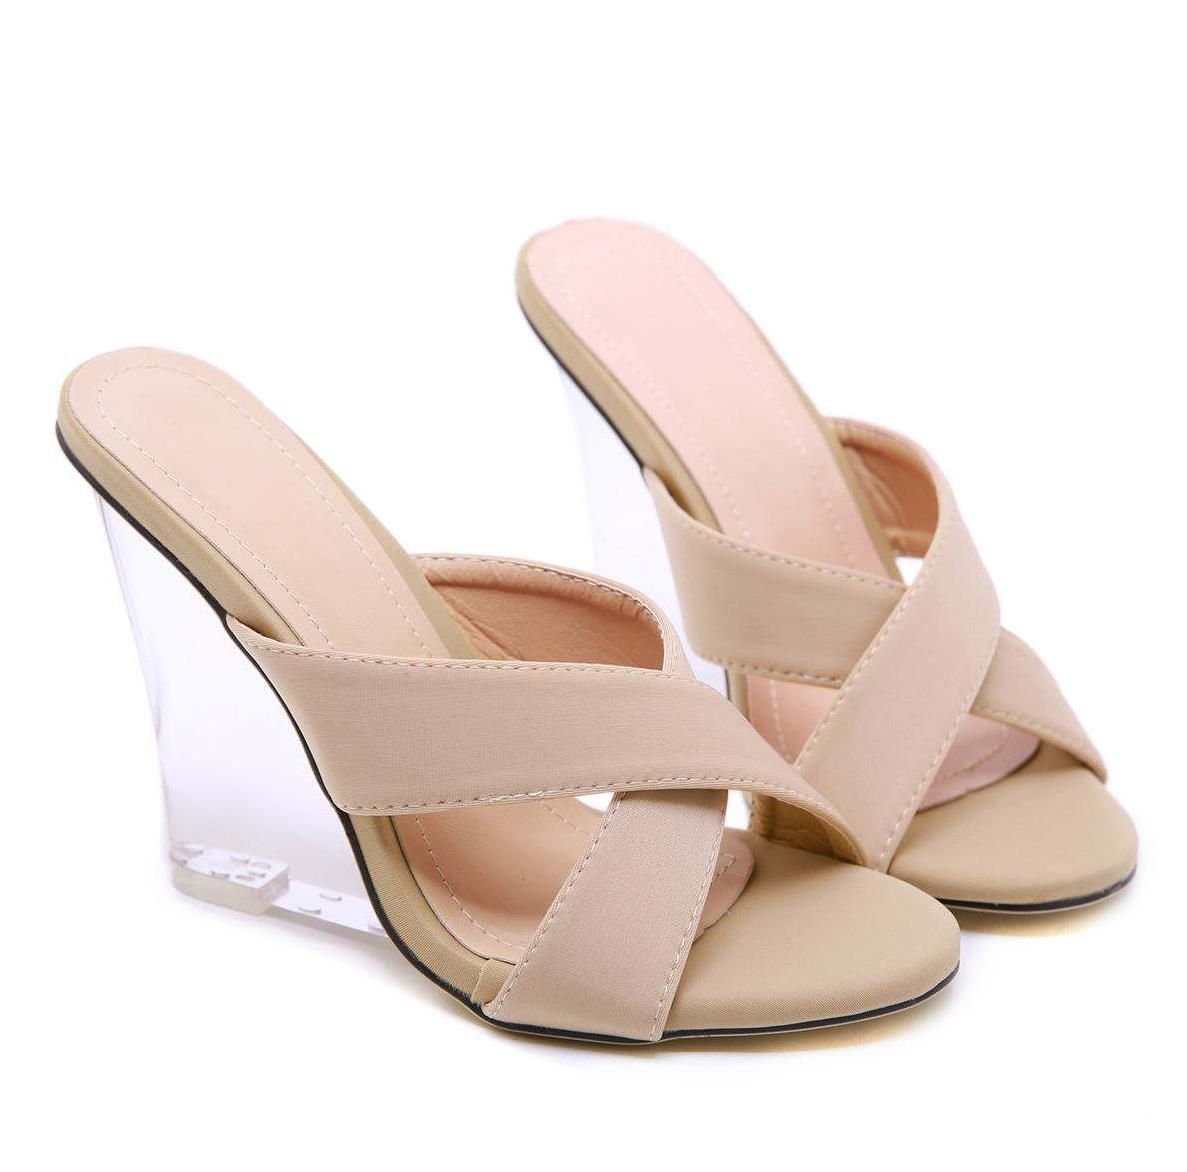 clear wedge sandals women's shoes